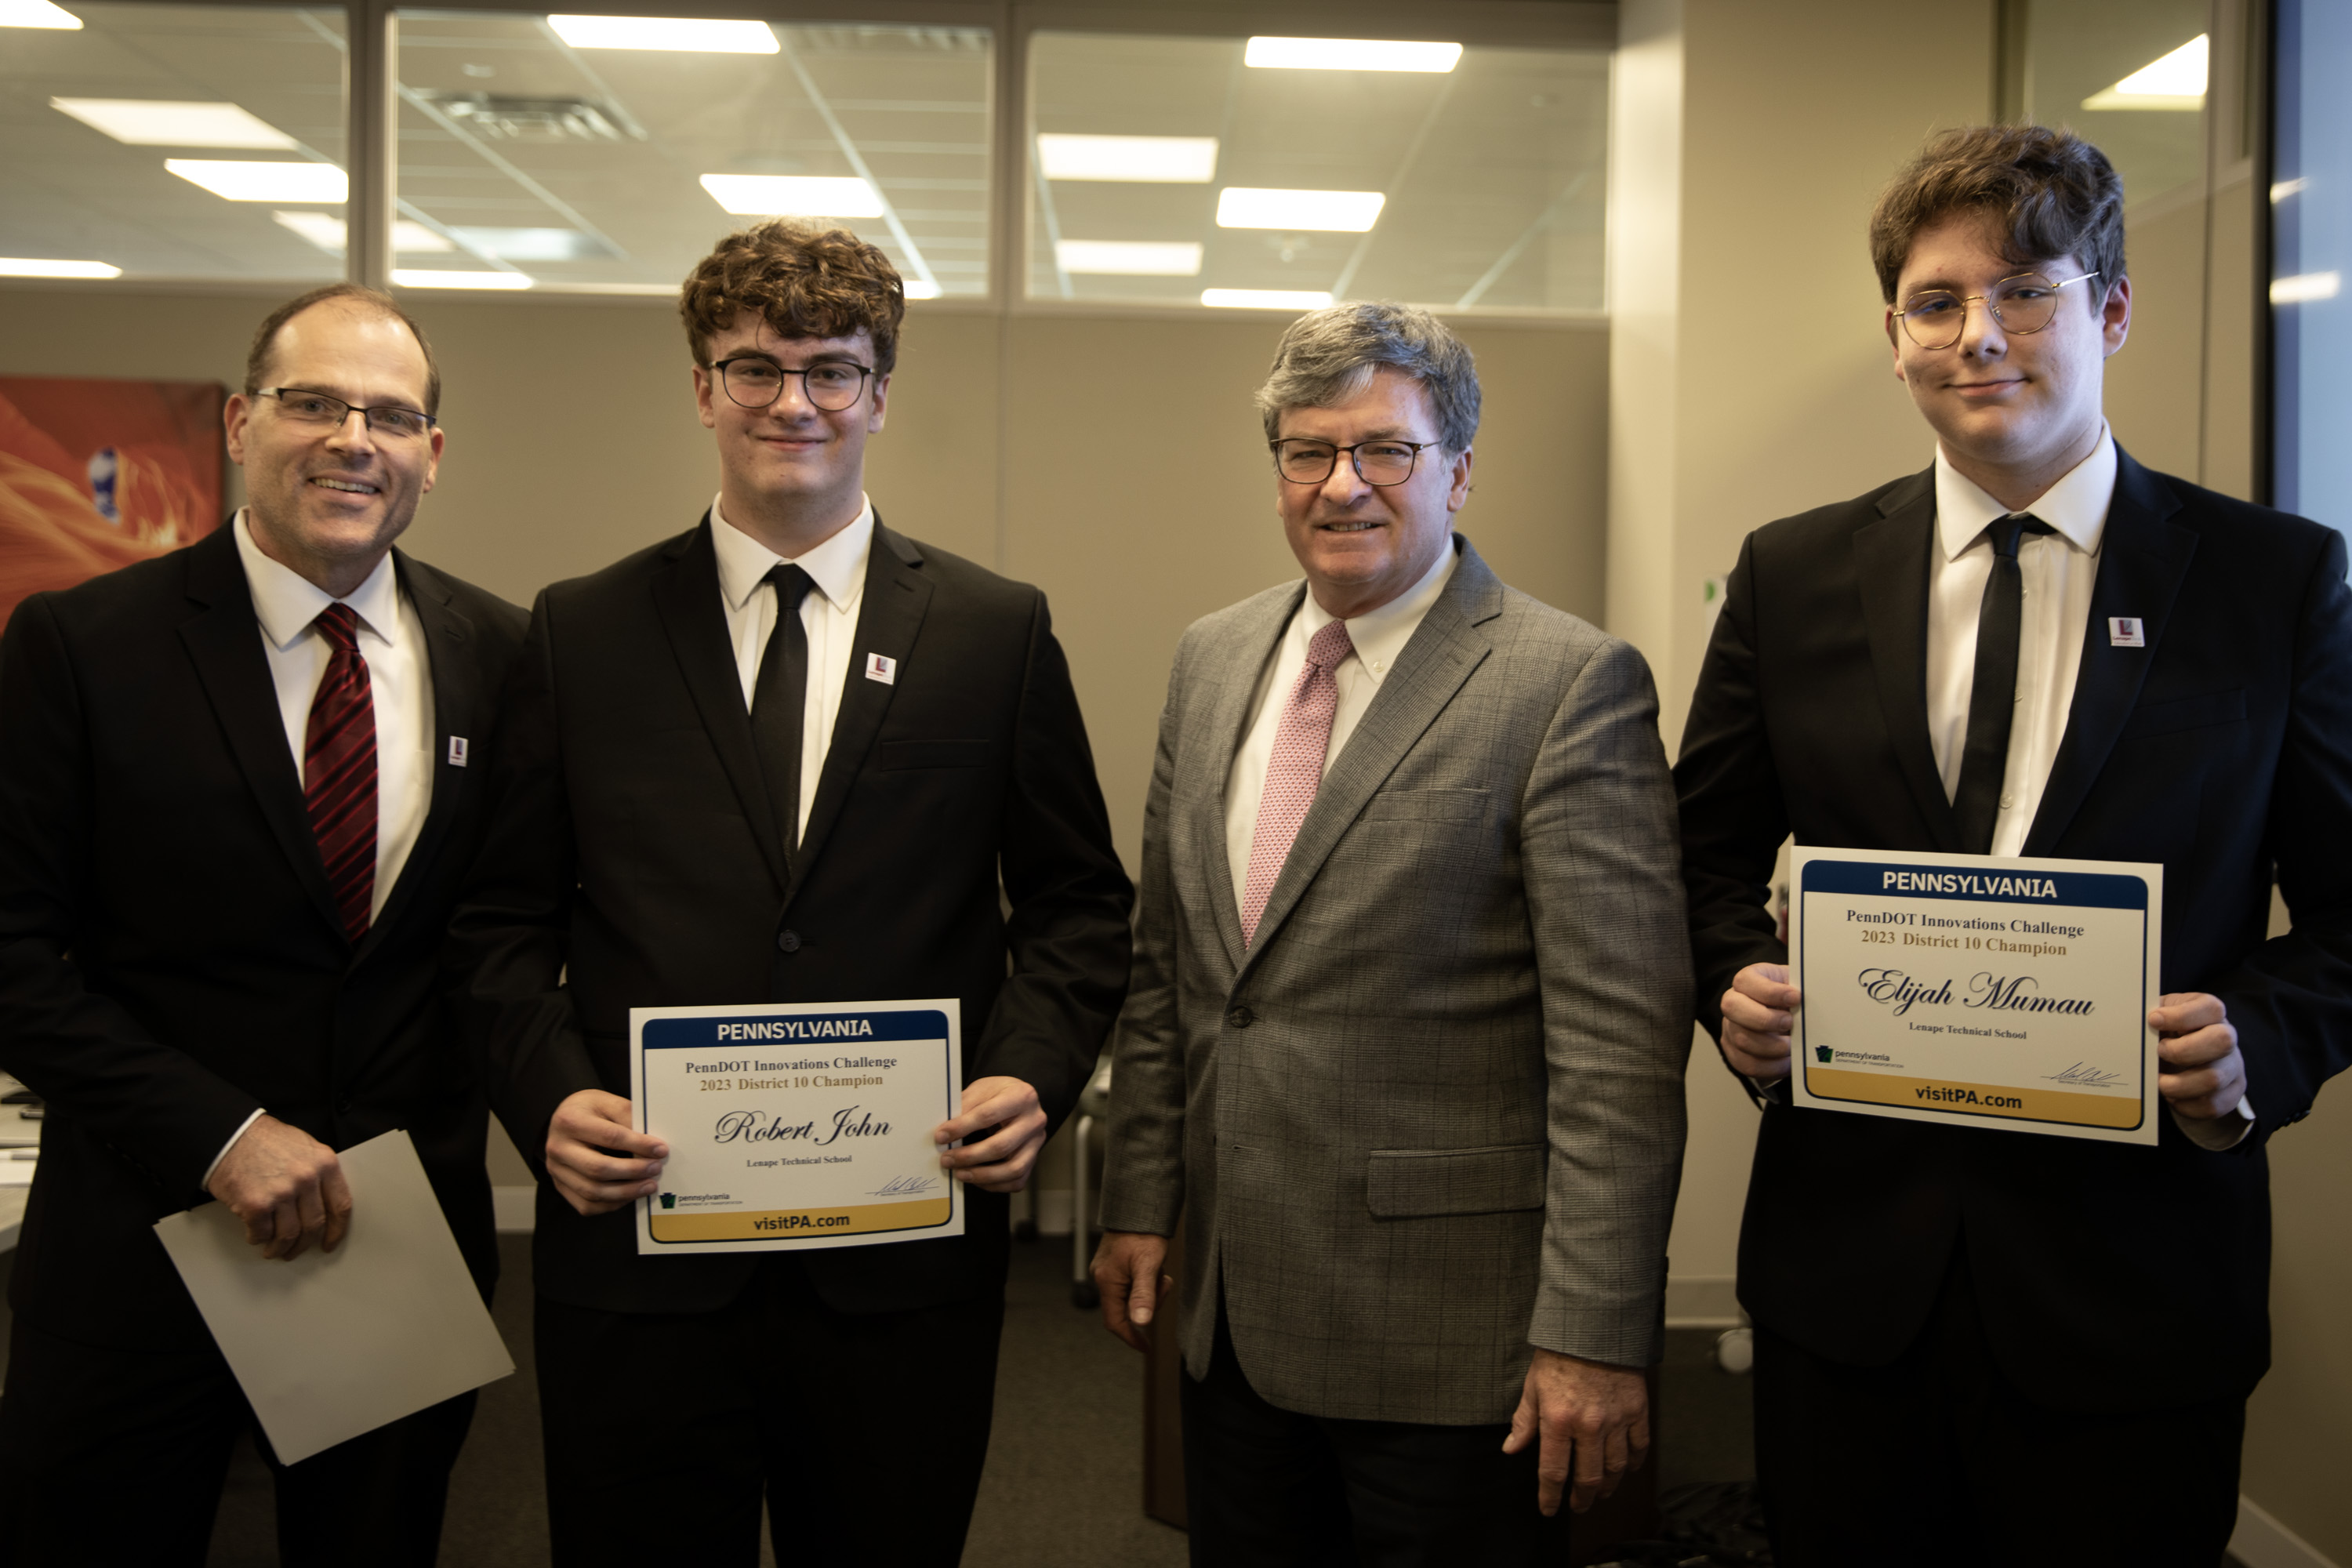 An image of PennDOT Secretary Michael Carroll standing in a row along with Lenape Technical School advisor Jason Zimmerman and students Elijah Mumau and Robert John who are receiving their certificates for winning the regional competition and moving on to the statewide judging event